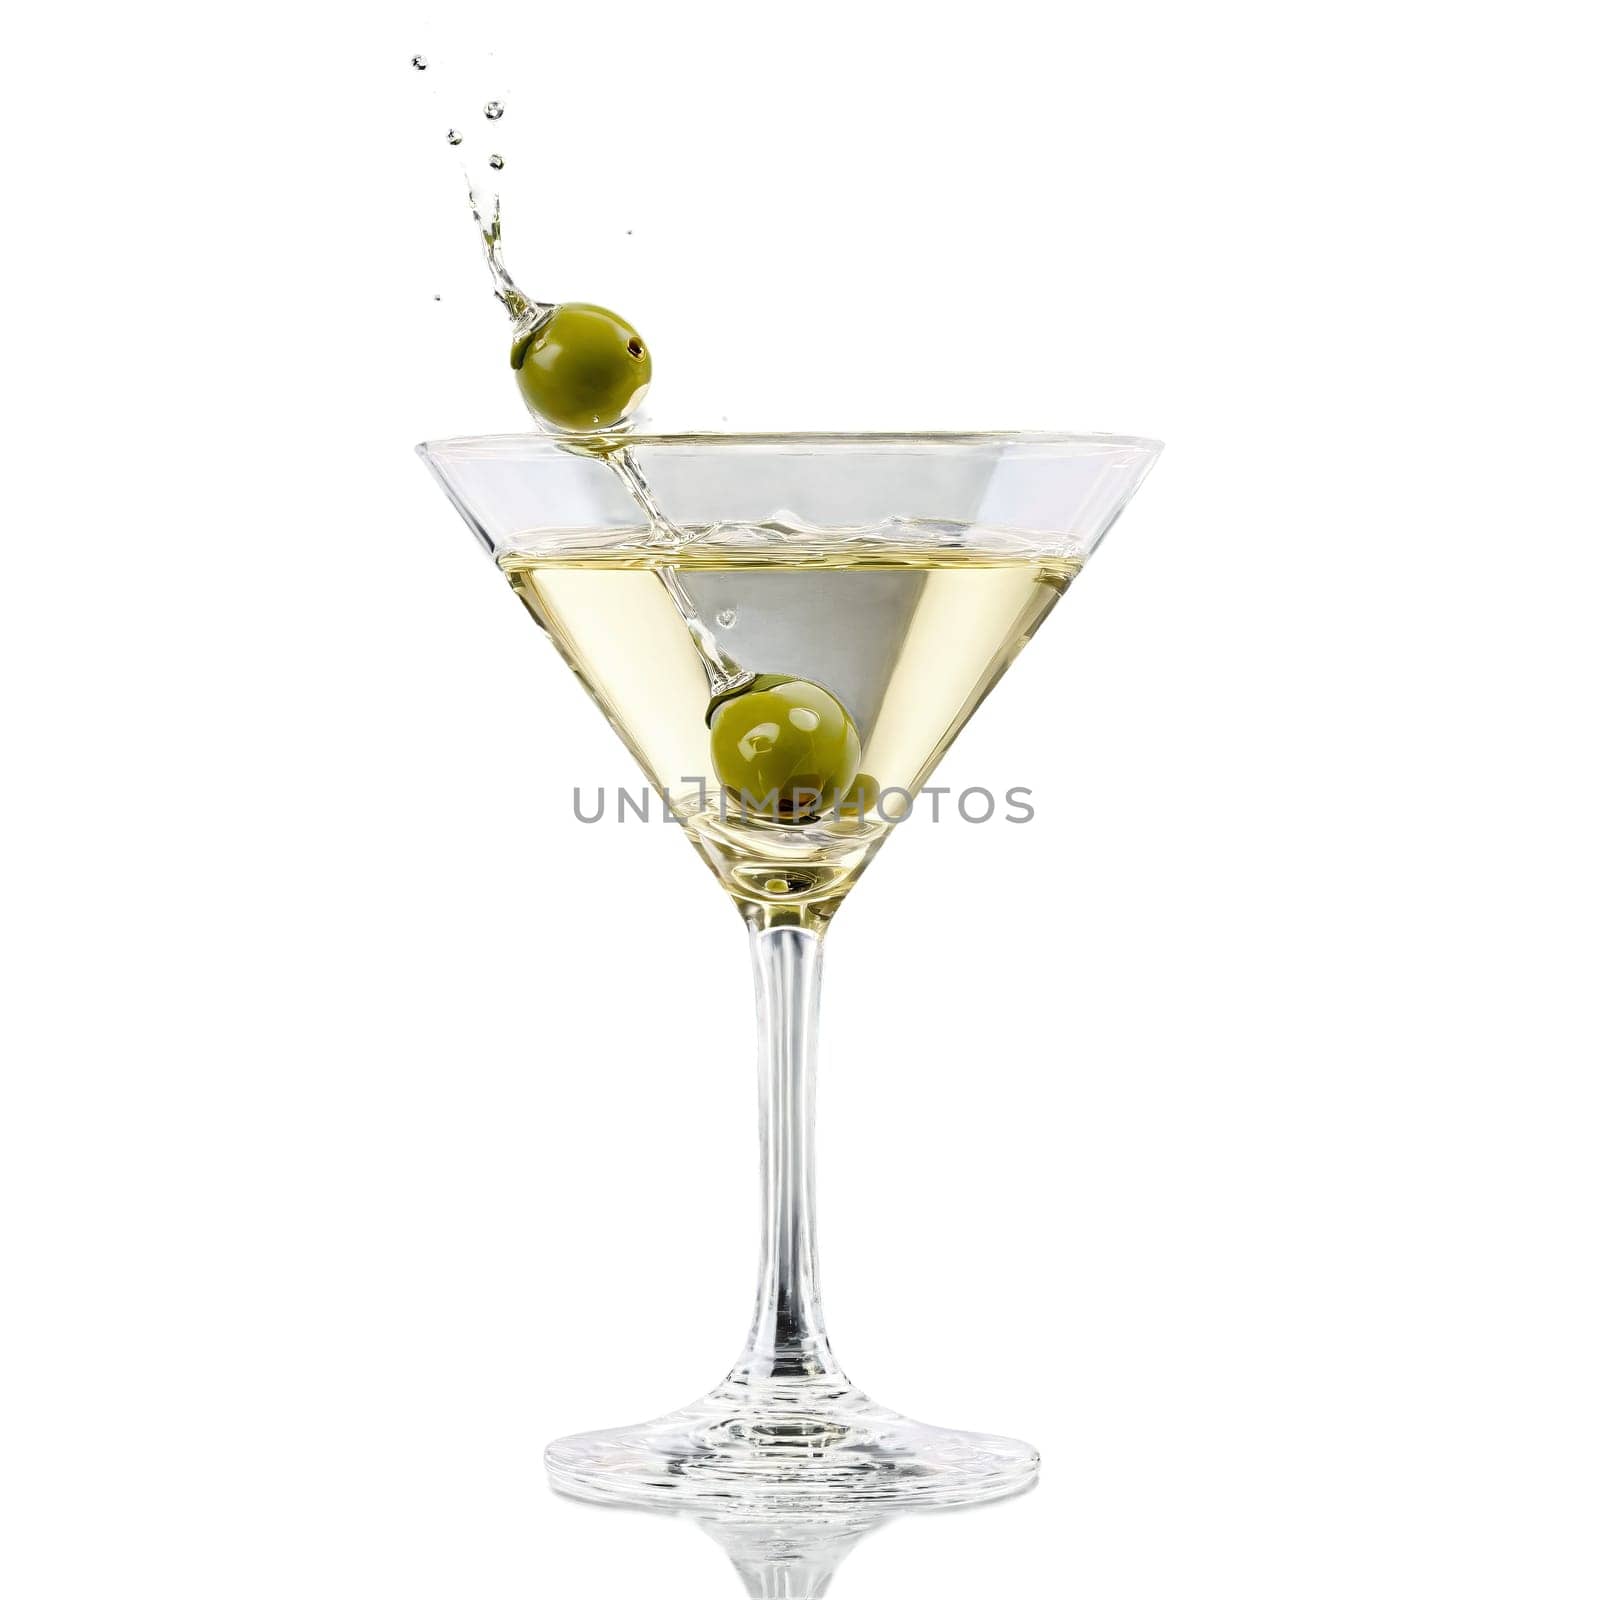 Martini glass sleek inverted cone shape one empty and one filled with clear liquid and by panophotograph